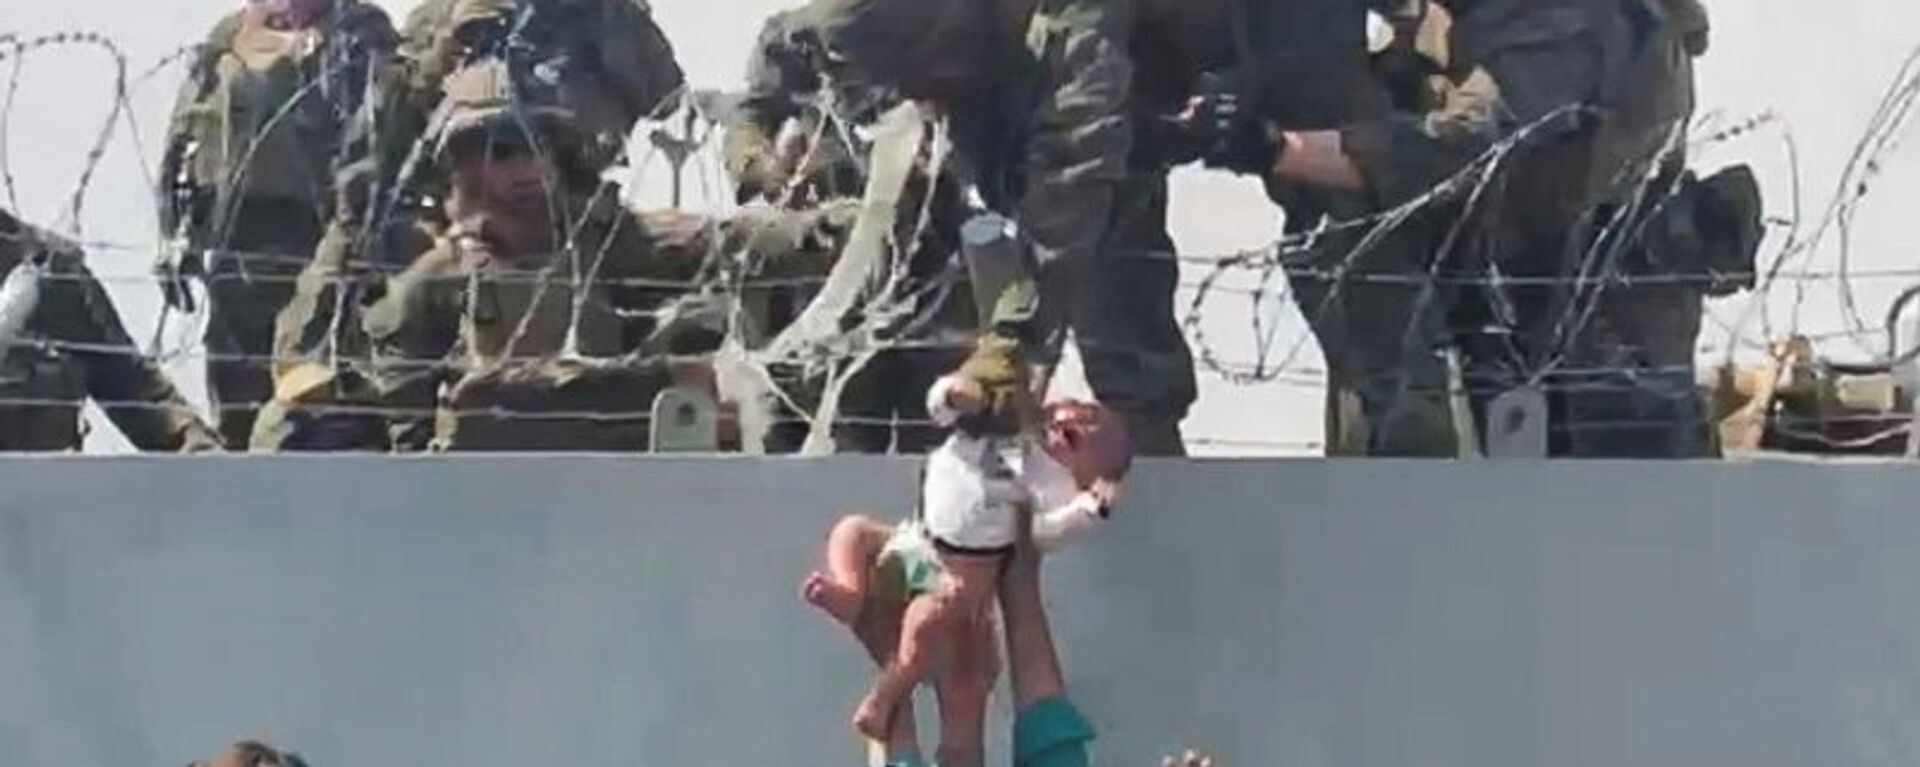 A baby is handed over to the American army over the perimeter wall of the airport for it to be evacuated, in Kabul, Afghanistan, August 19, 2021, in this still image taken from video obtained from social media. - Sputnik International, 1920, 15.09.2021